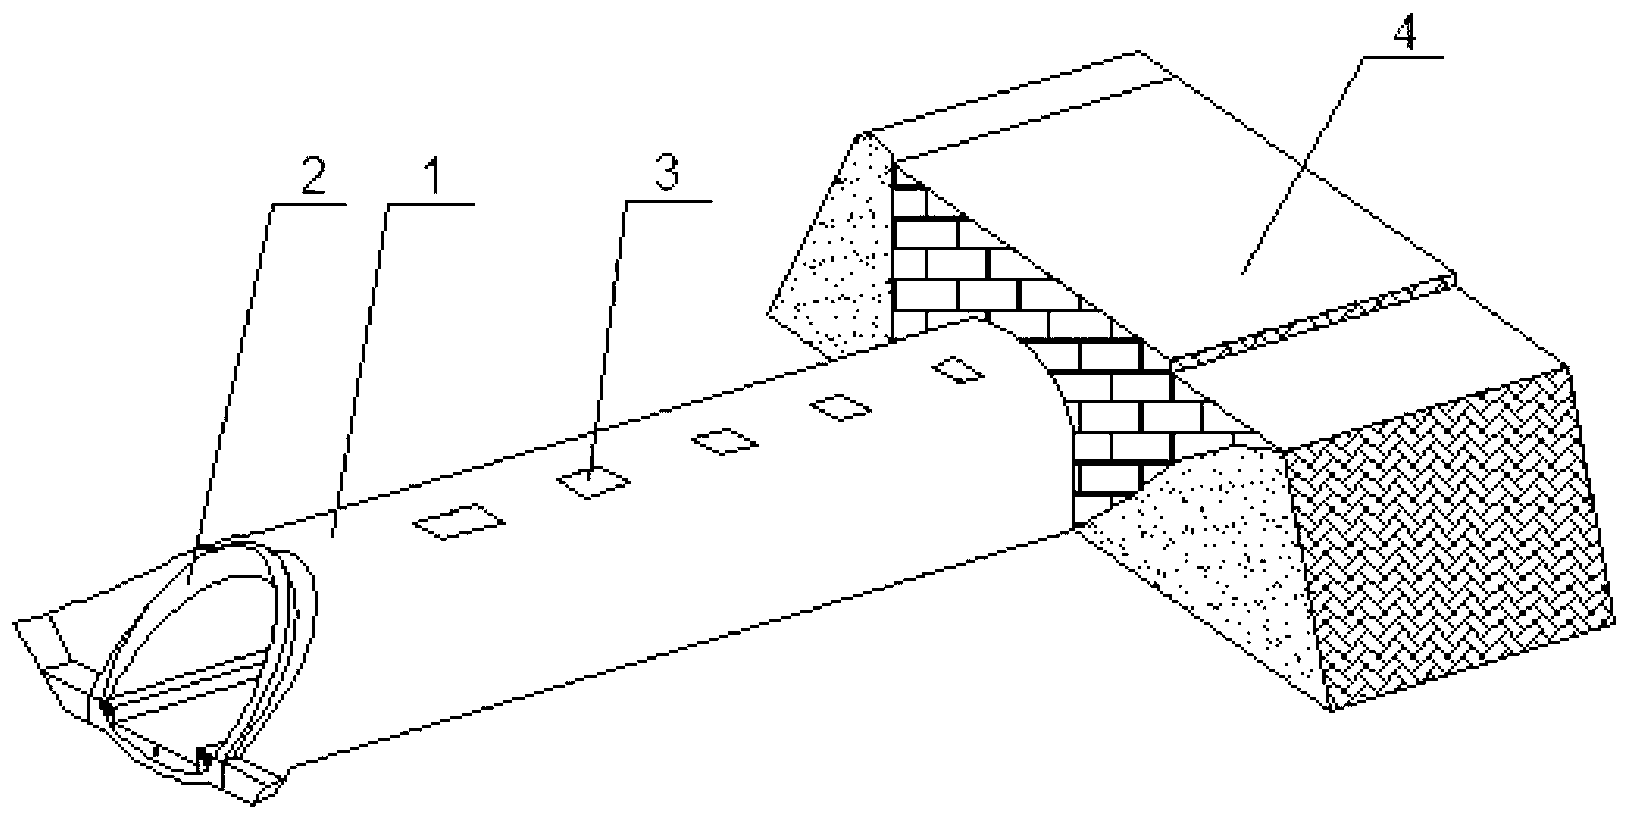 Buffer structure of double-track tunnel portal of high-speed rail